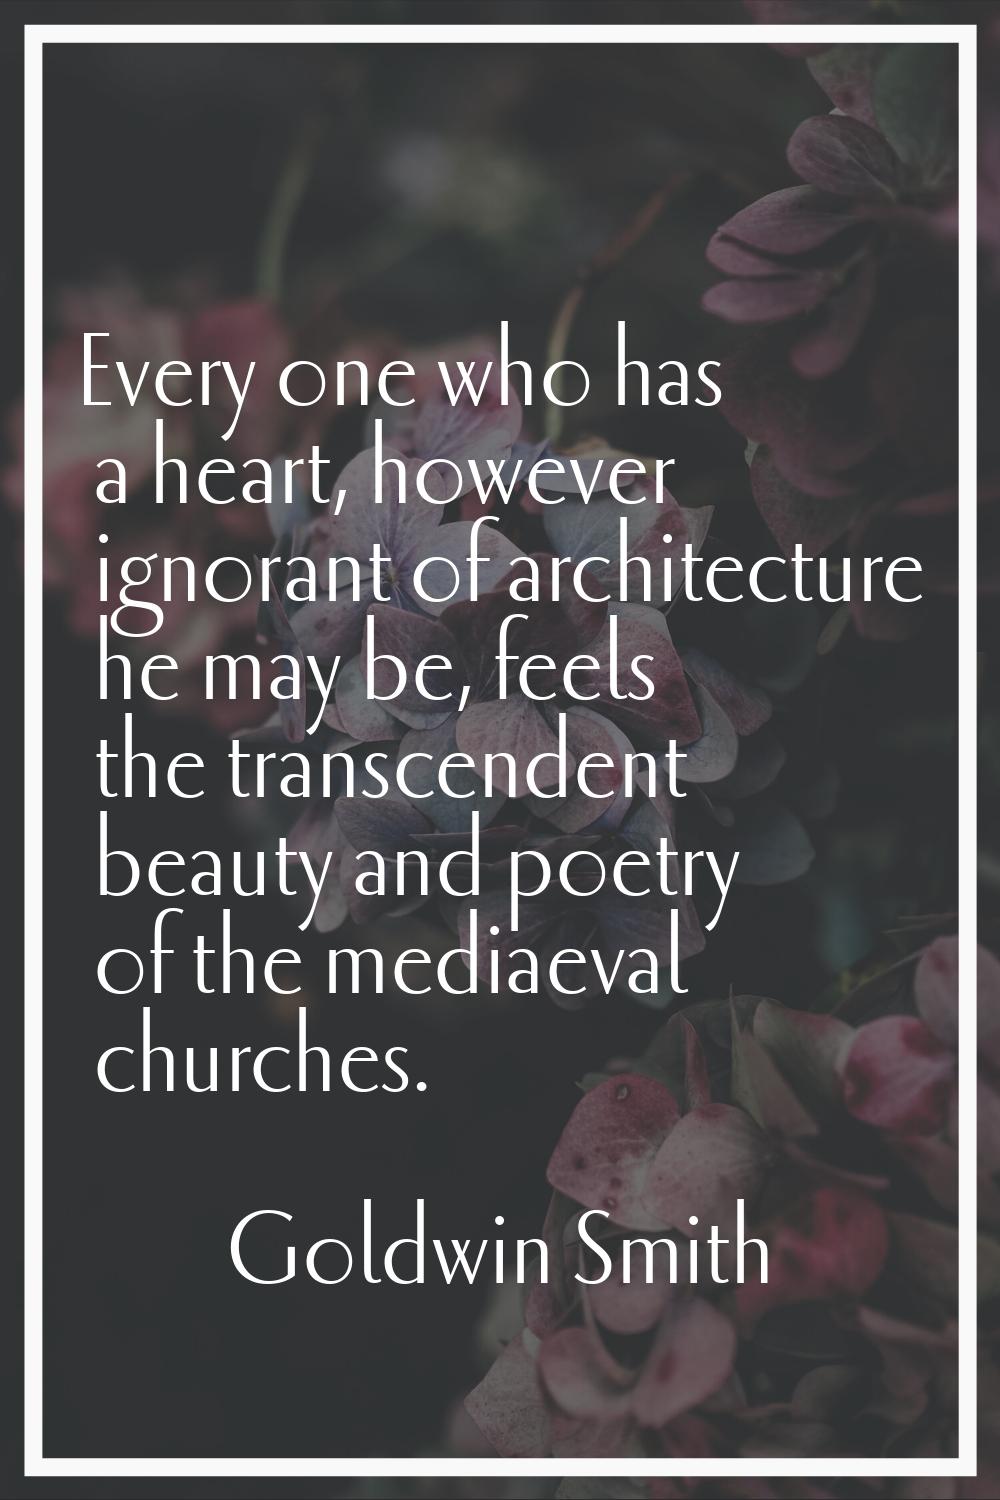 Every one who has a heart, however ignorant of architecture he may be, feels the transcendent beaut